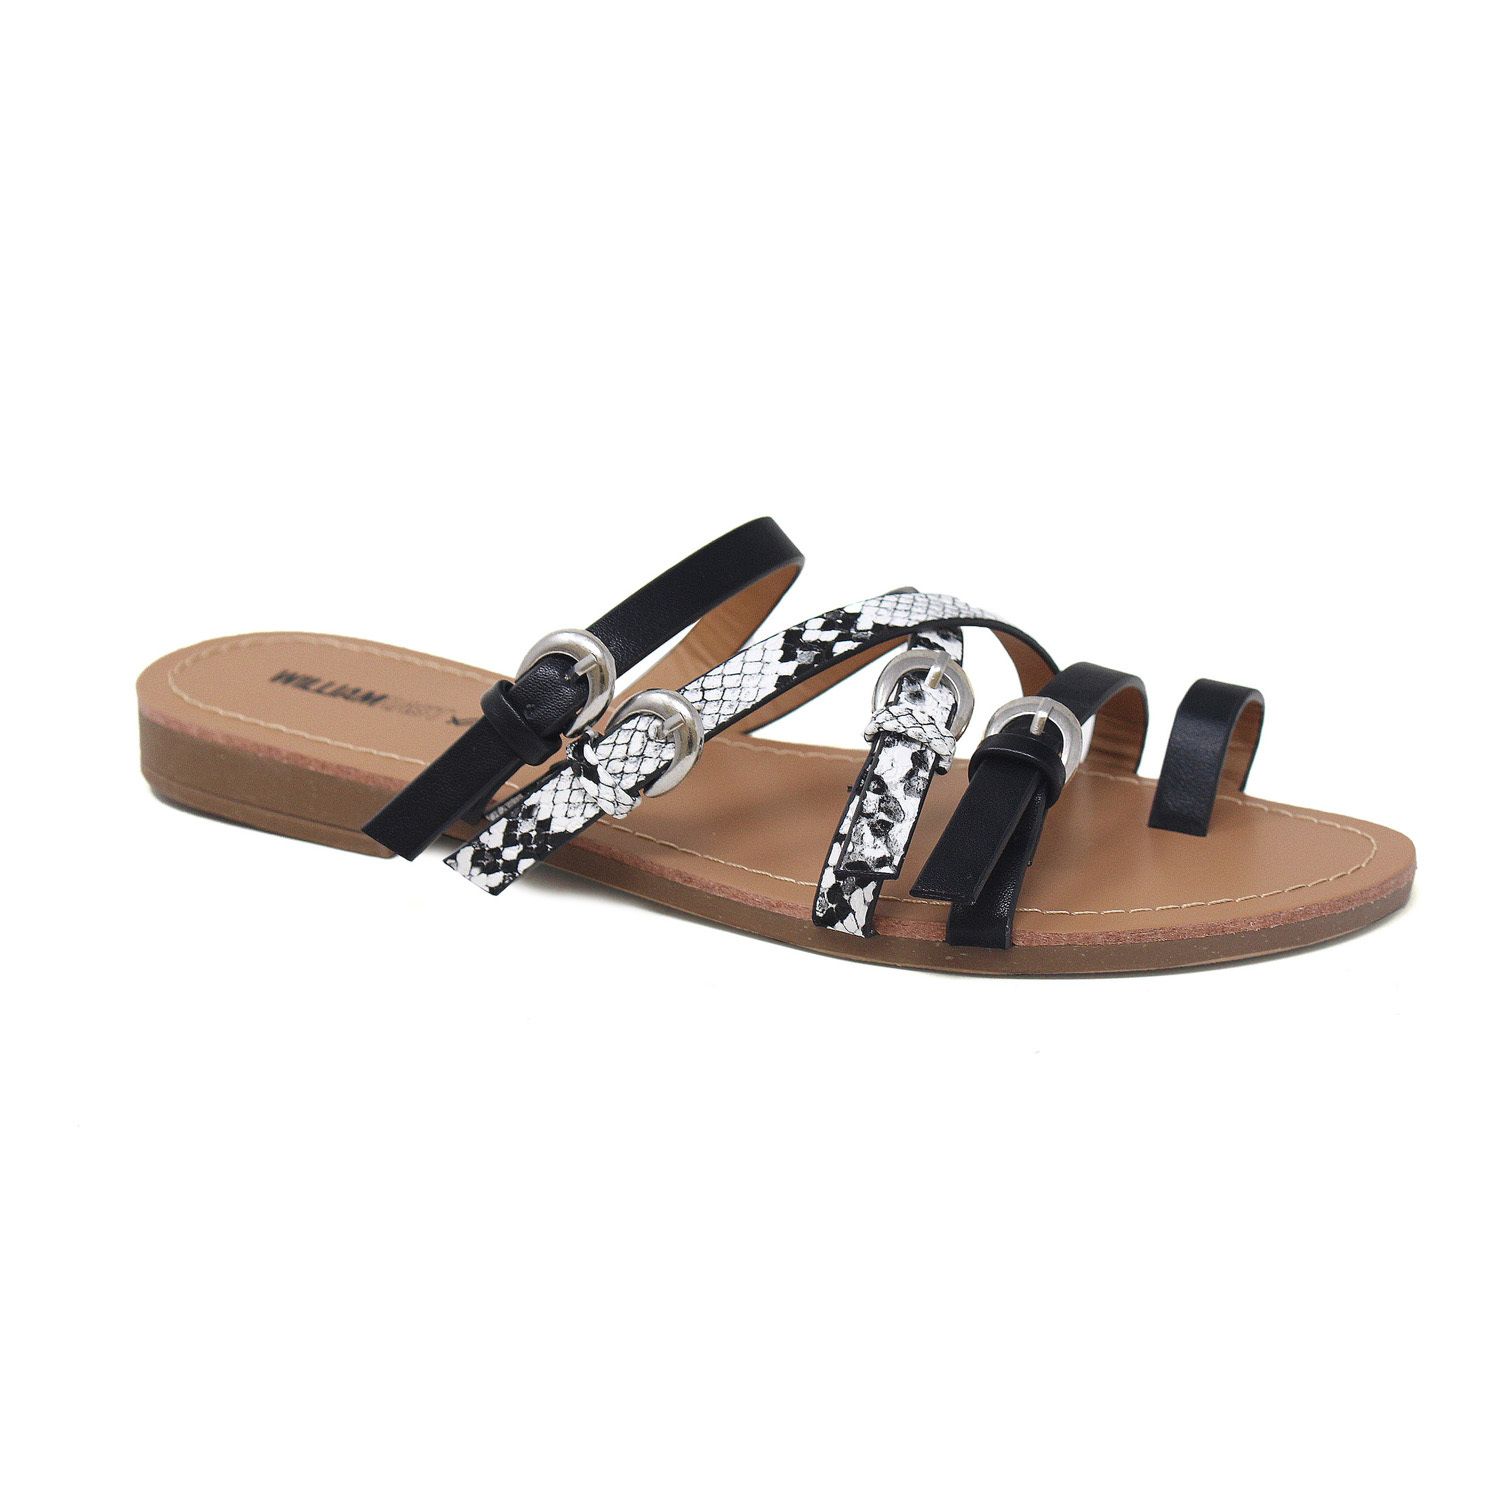 Womens Water-Resistant Sandals - Shoes 